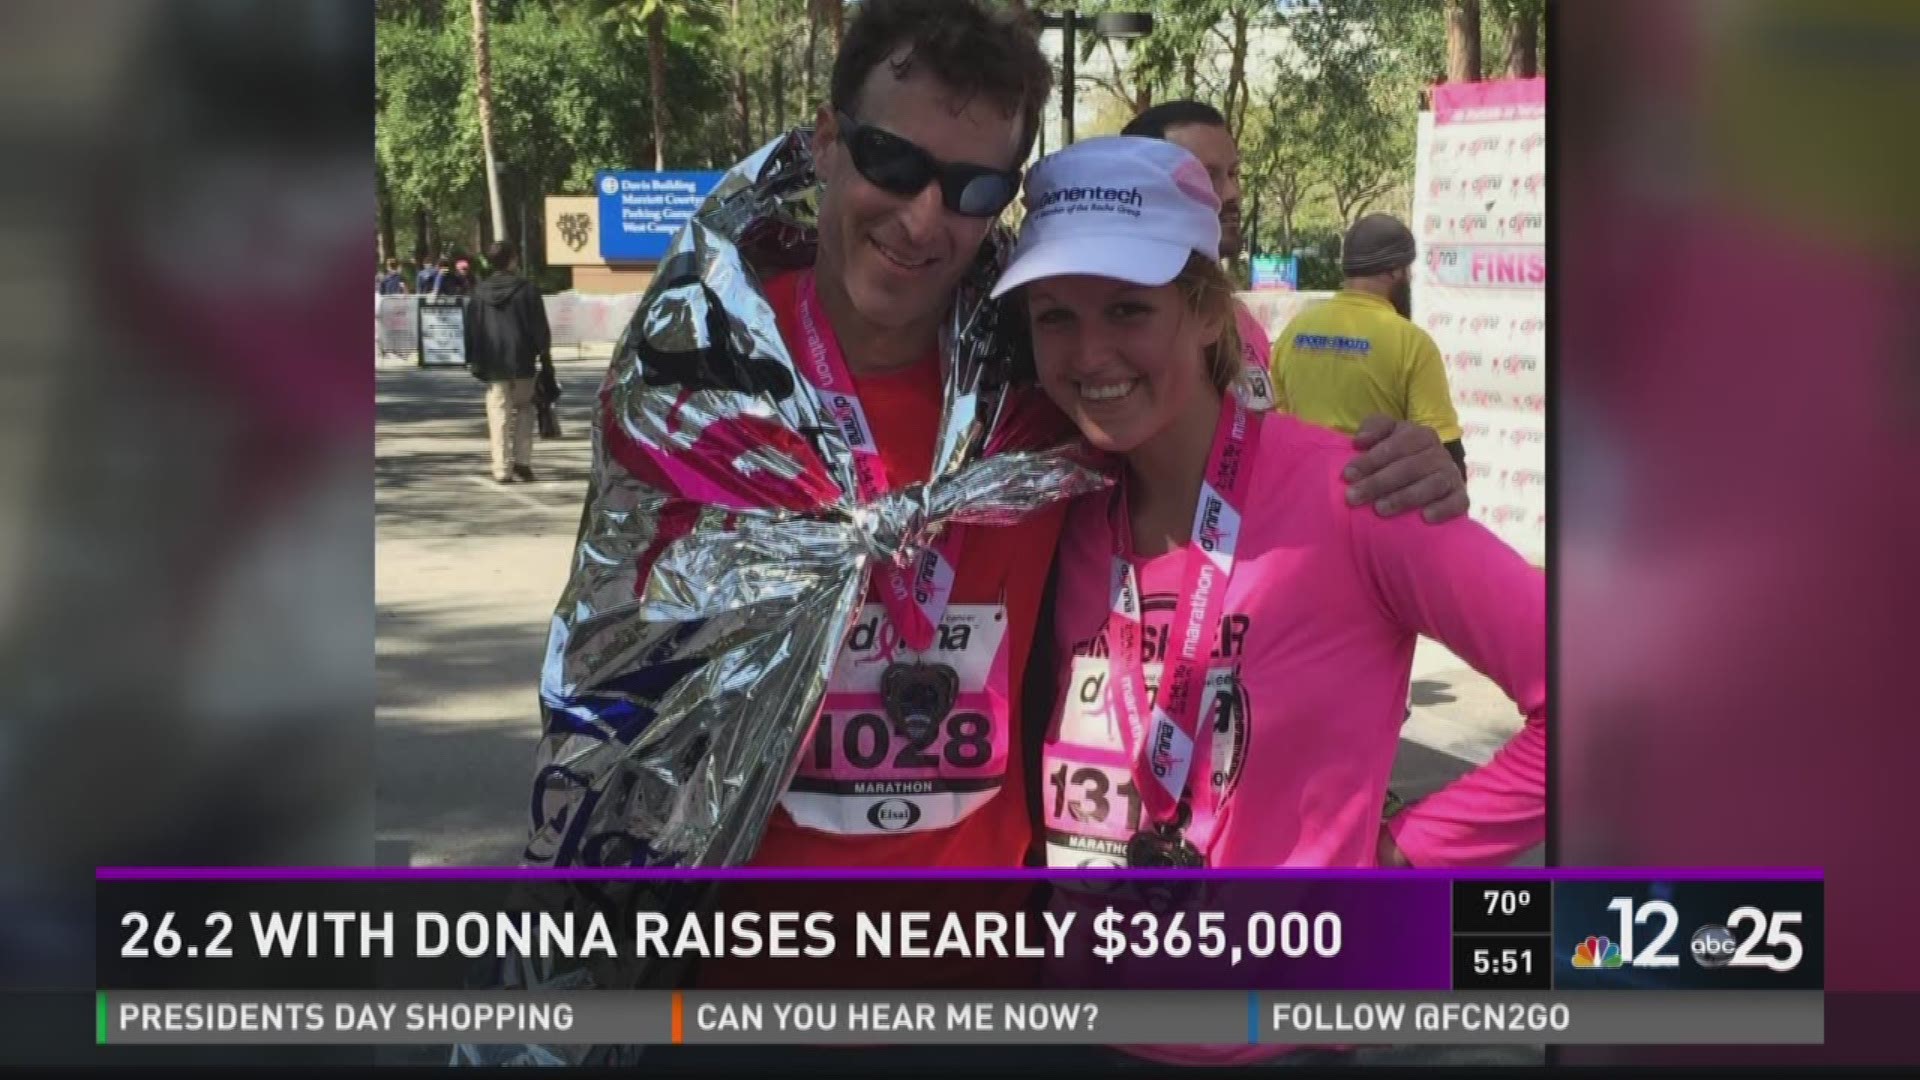 26.2 with Donna raises nearly $365,000 to finish breast cancer